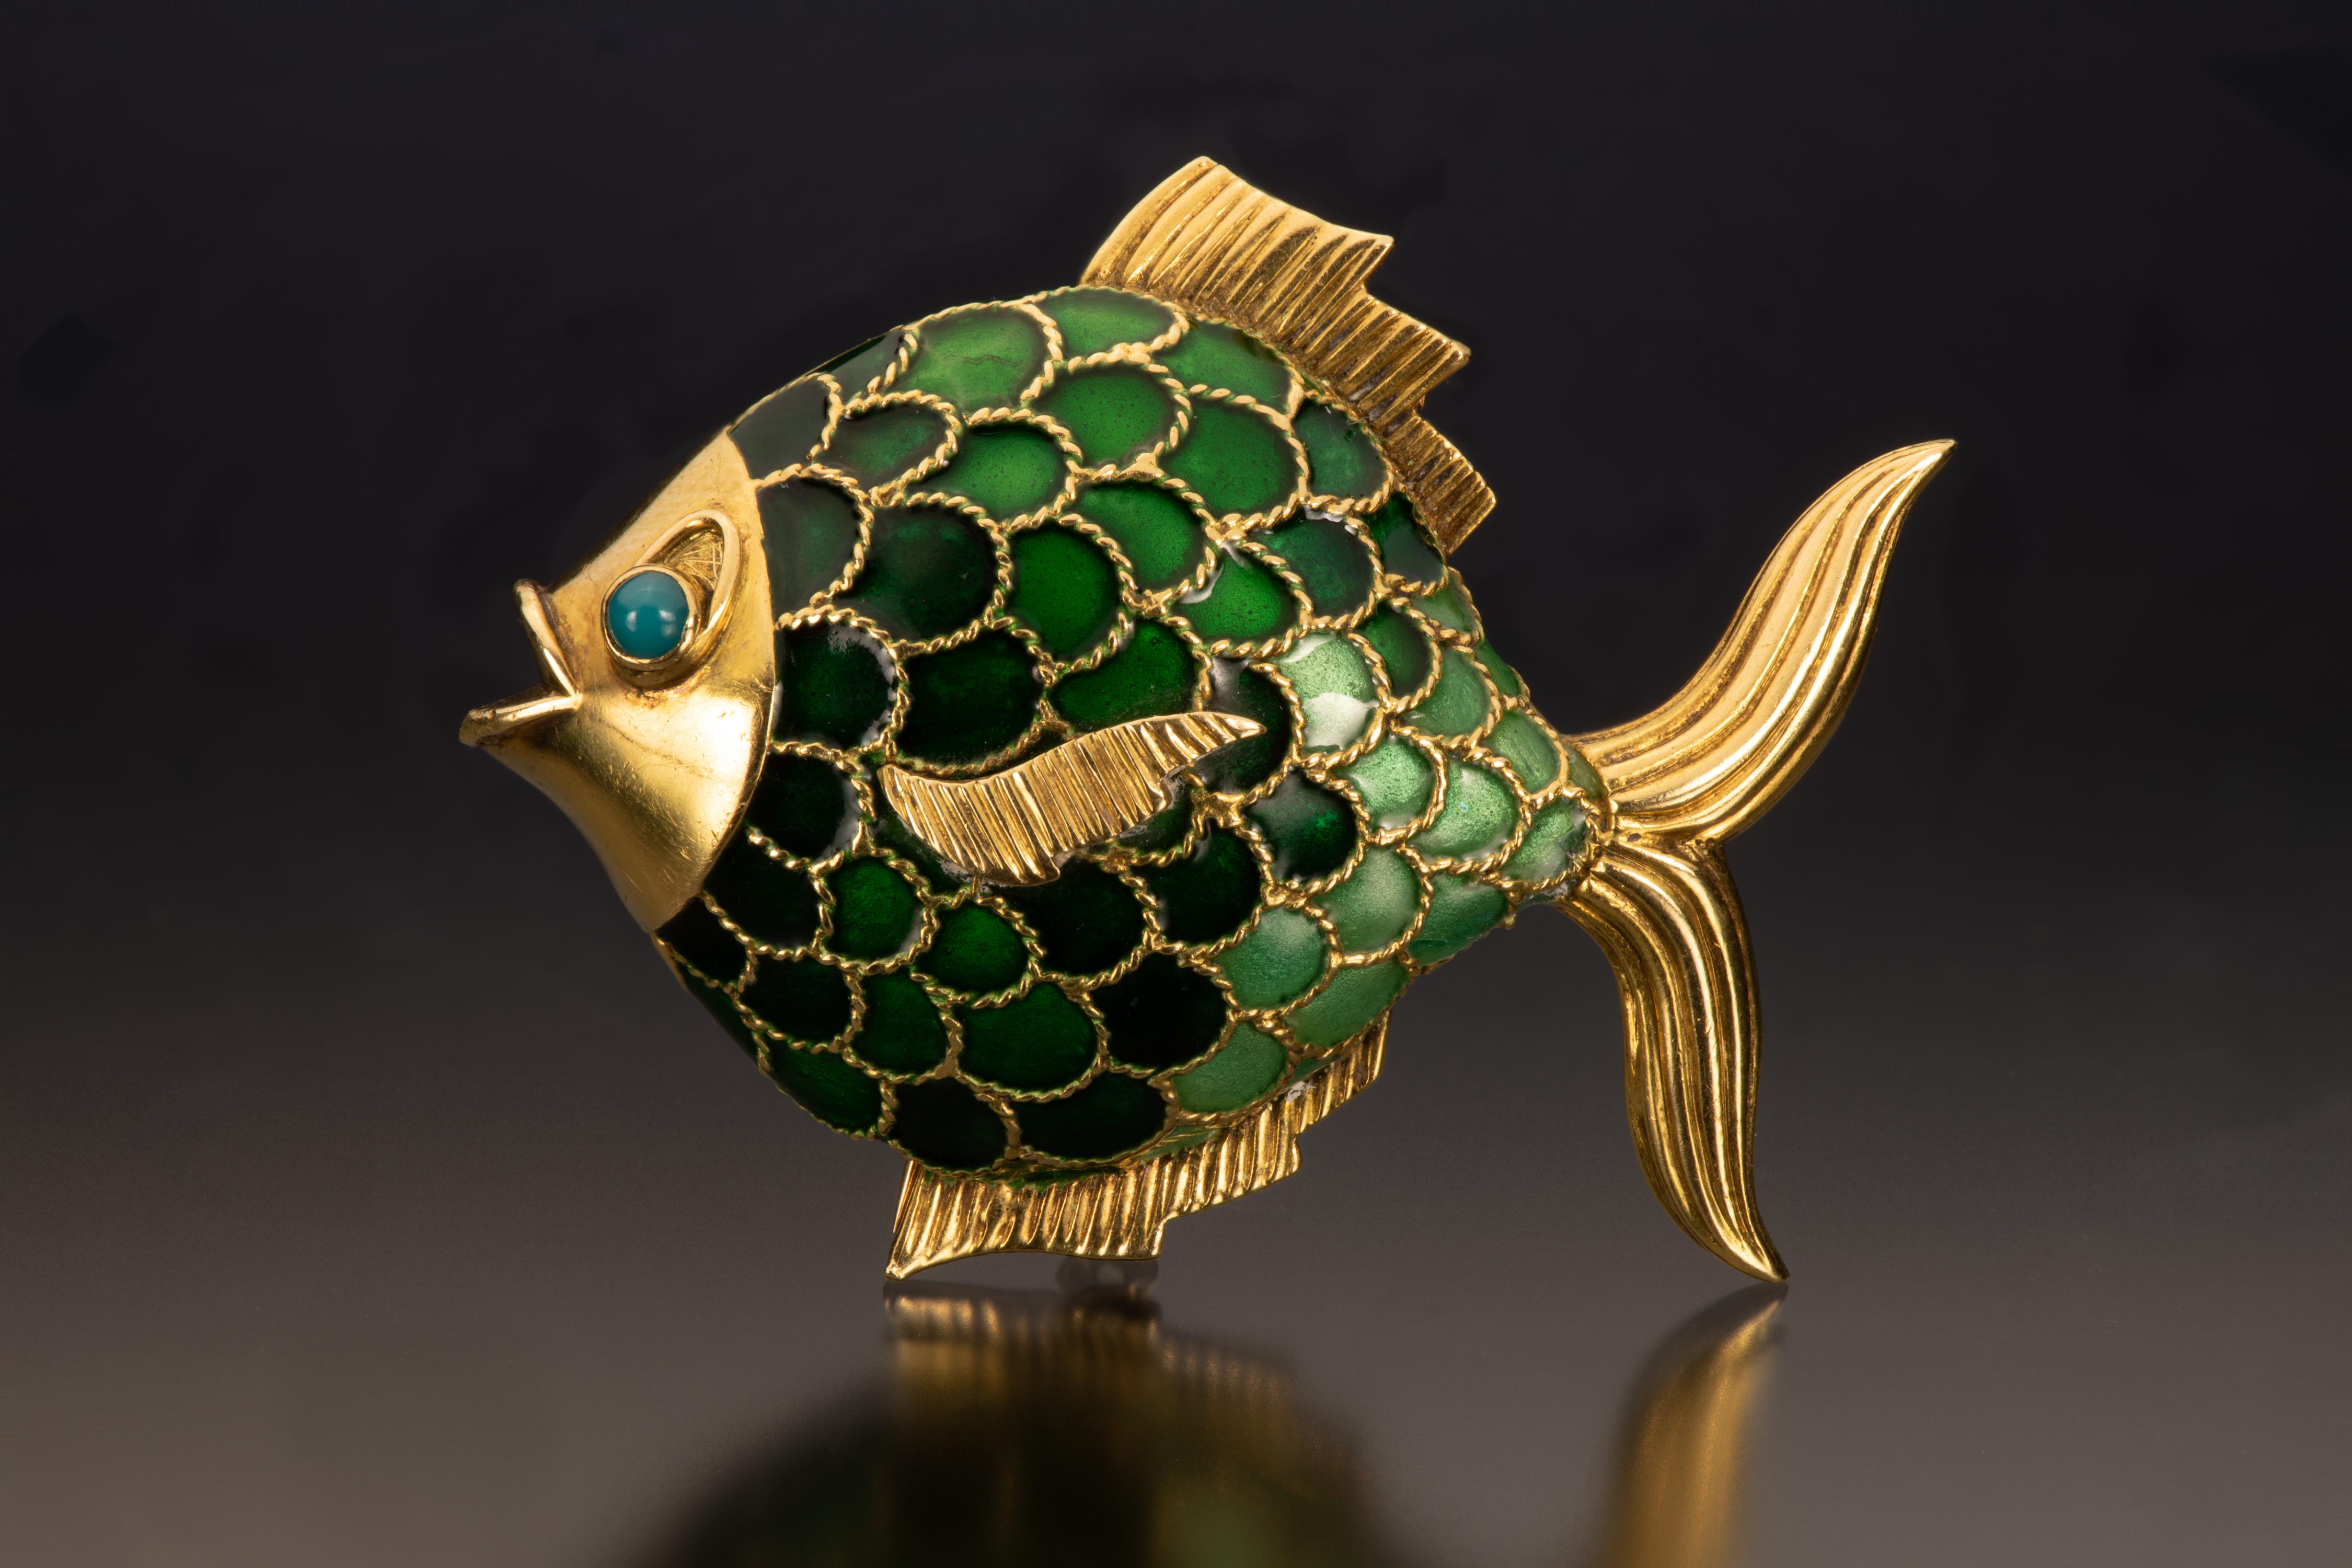 This vintage gold and enamel fish brooch illustrates the playful side of Boucheron. Shades of green enamel form the scales, and the 18k gold head is set with a cabochon gemstone eye.   

- Length is 1.75 inches and width is 2.25 inches